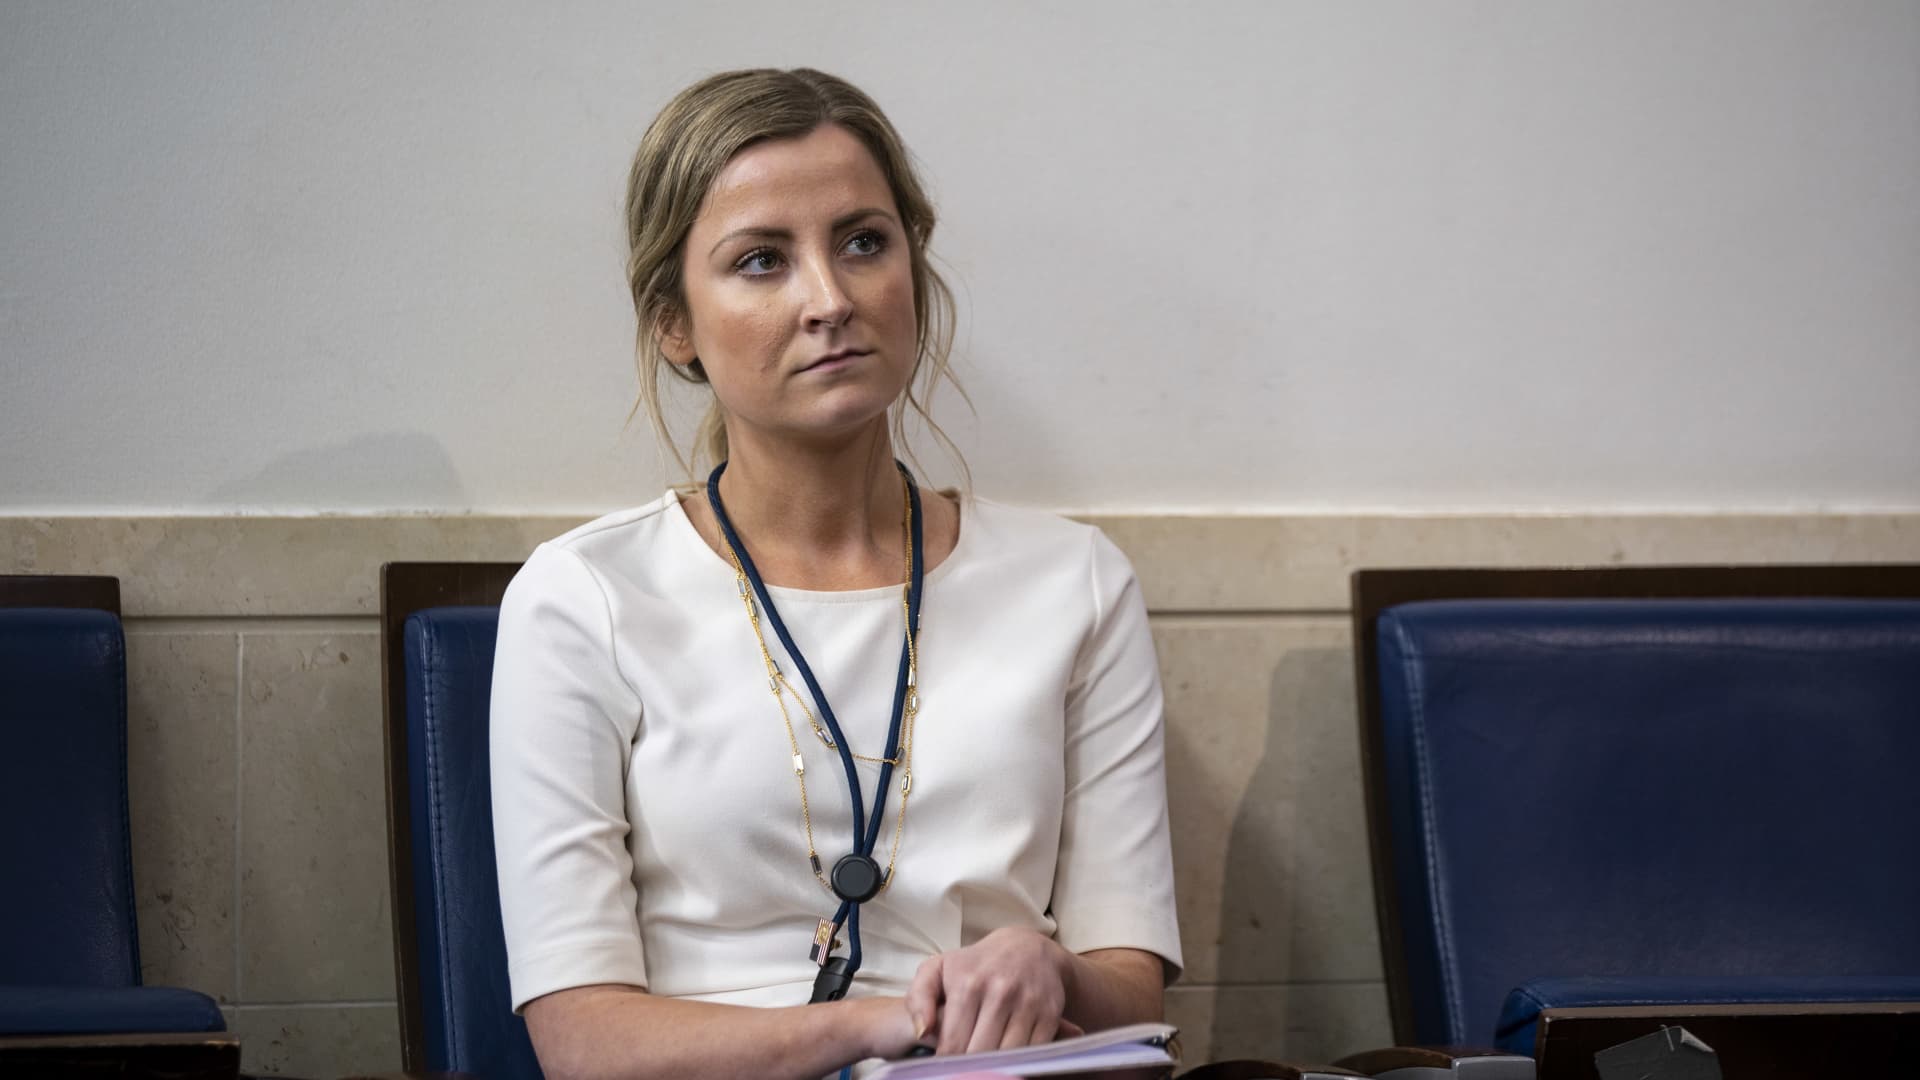 Sarah Matthews, White House deputy press secretary, listens during a news conference in the James S. Brady Press Briefing Room at the White House in Washington, D.C., U.S. on Wednesday, July 8, 2020.